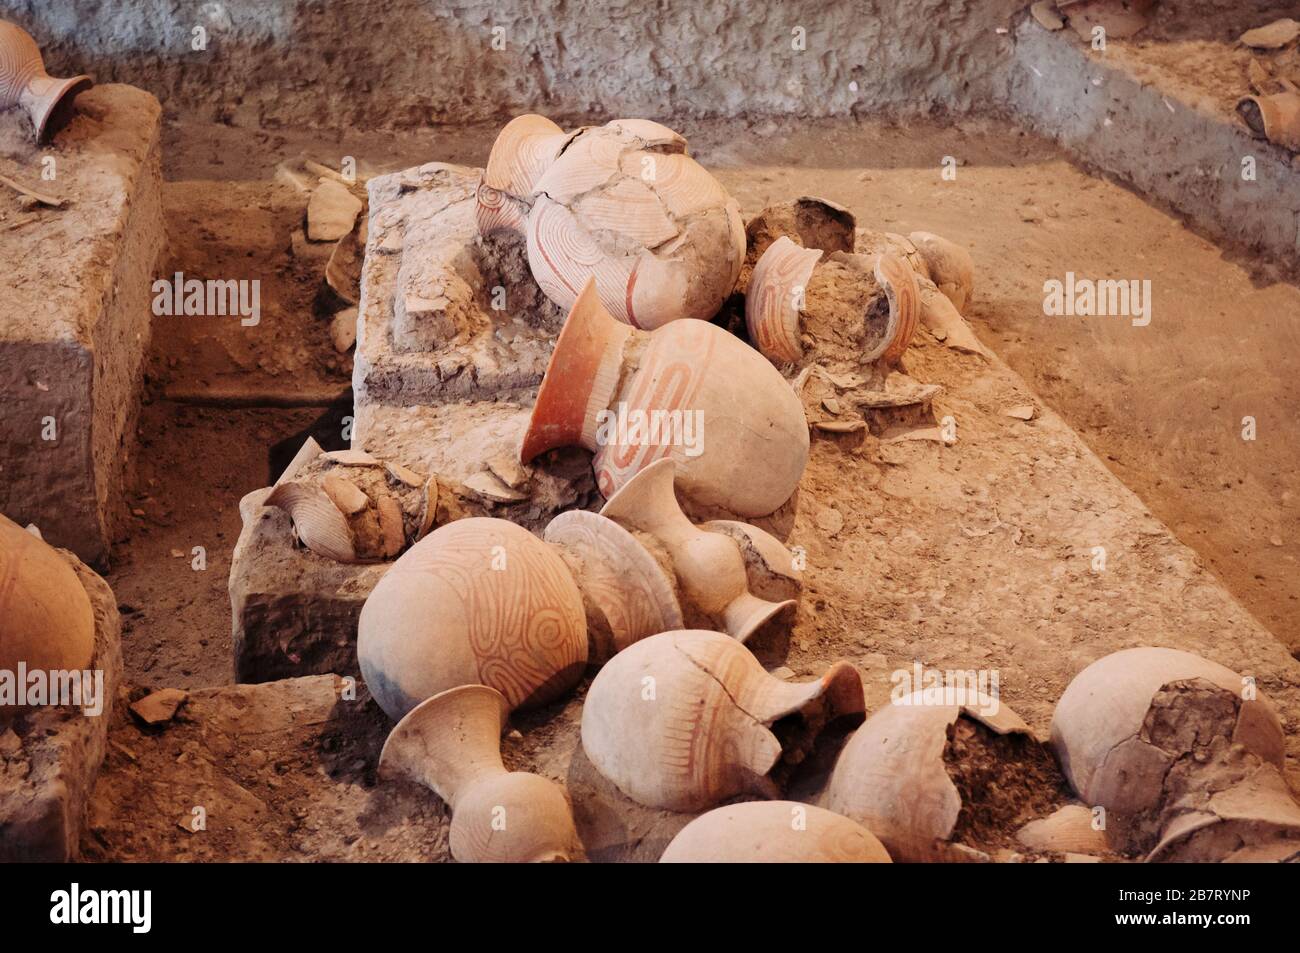 JAN 12, 2019 Udon Thani, Thailand - Ancient pottery containers and prehistory ceramic ware in excavation site of Ban Chiang Museum Stock Photo